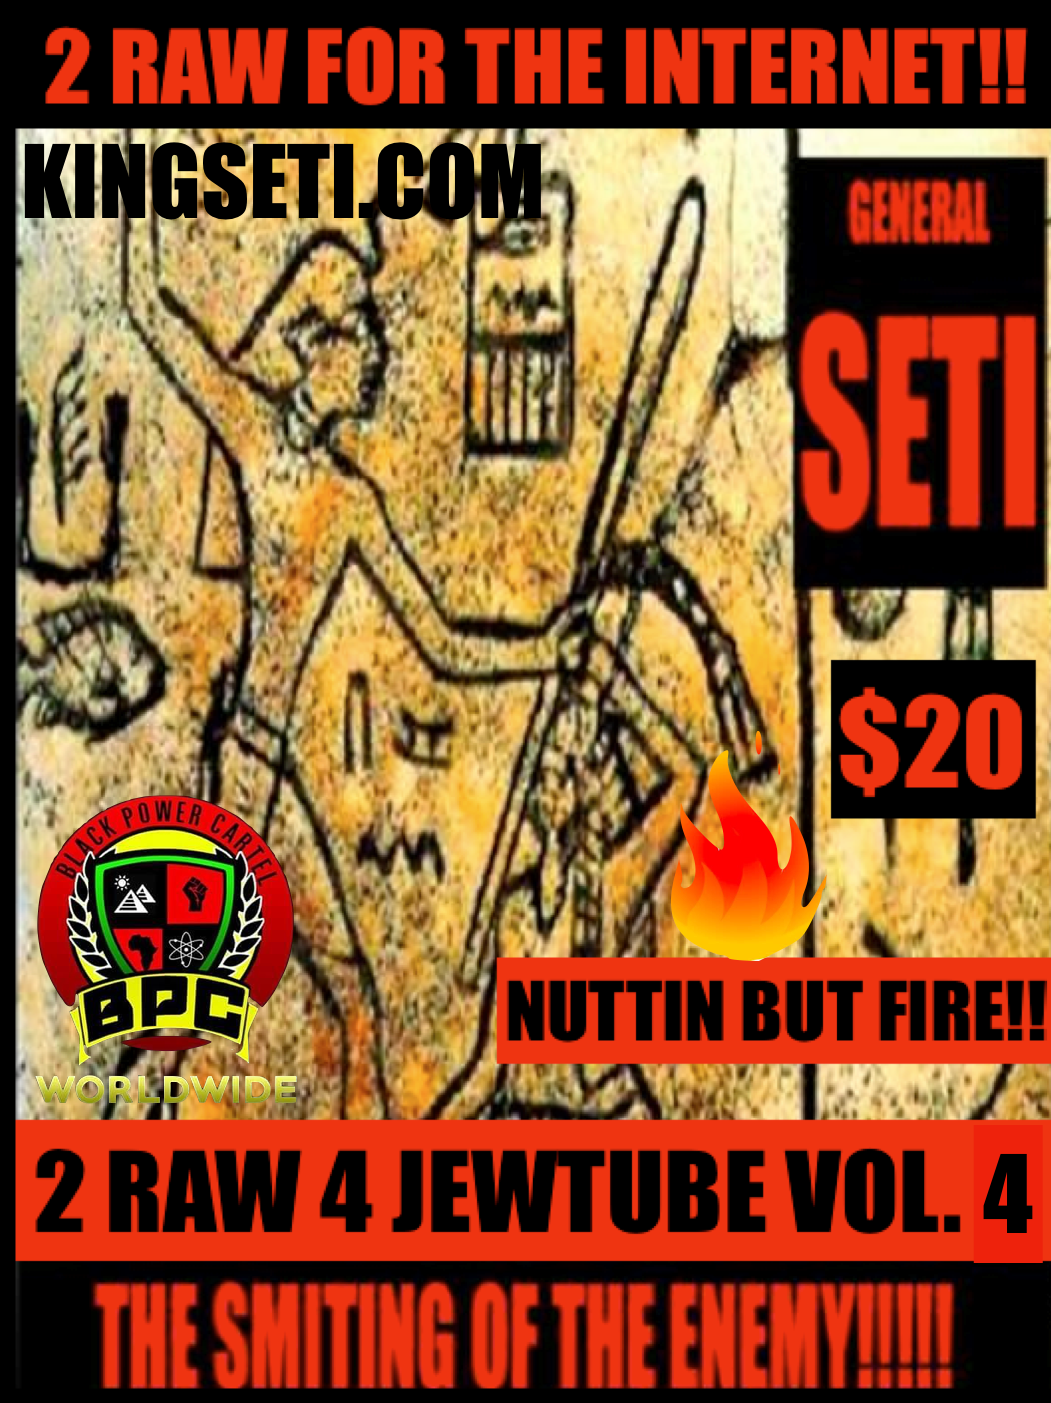 2 RAW 4 YOUTUBE VOL. 4: SMITING OF THE ENEMY!!